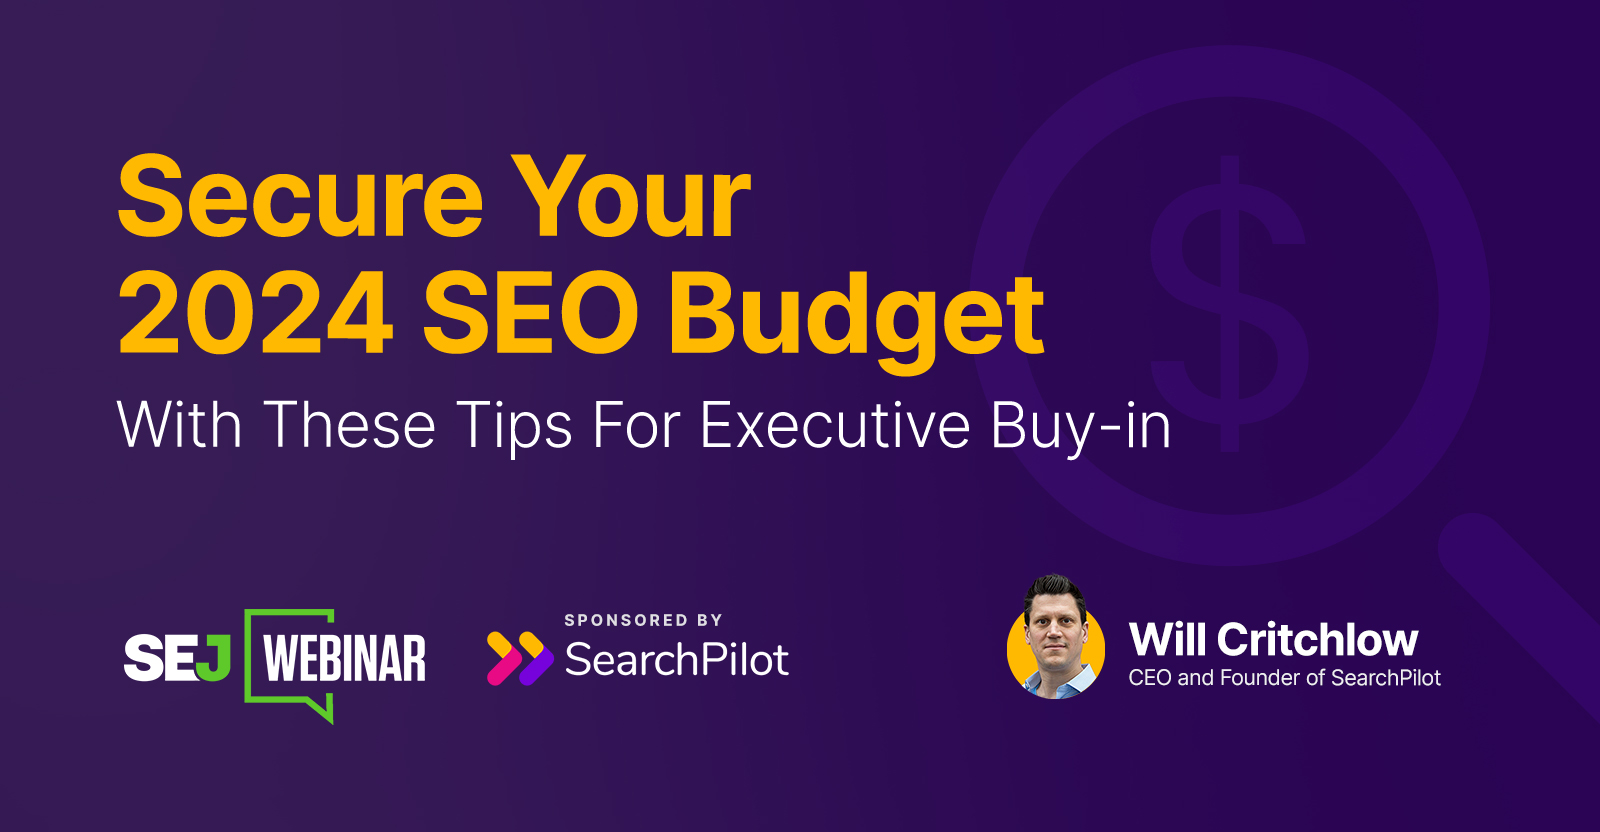 Secure Your 2024 SEO Budget With These Tips For Executive Buy-in